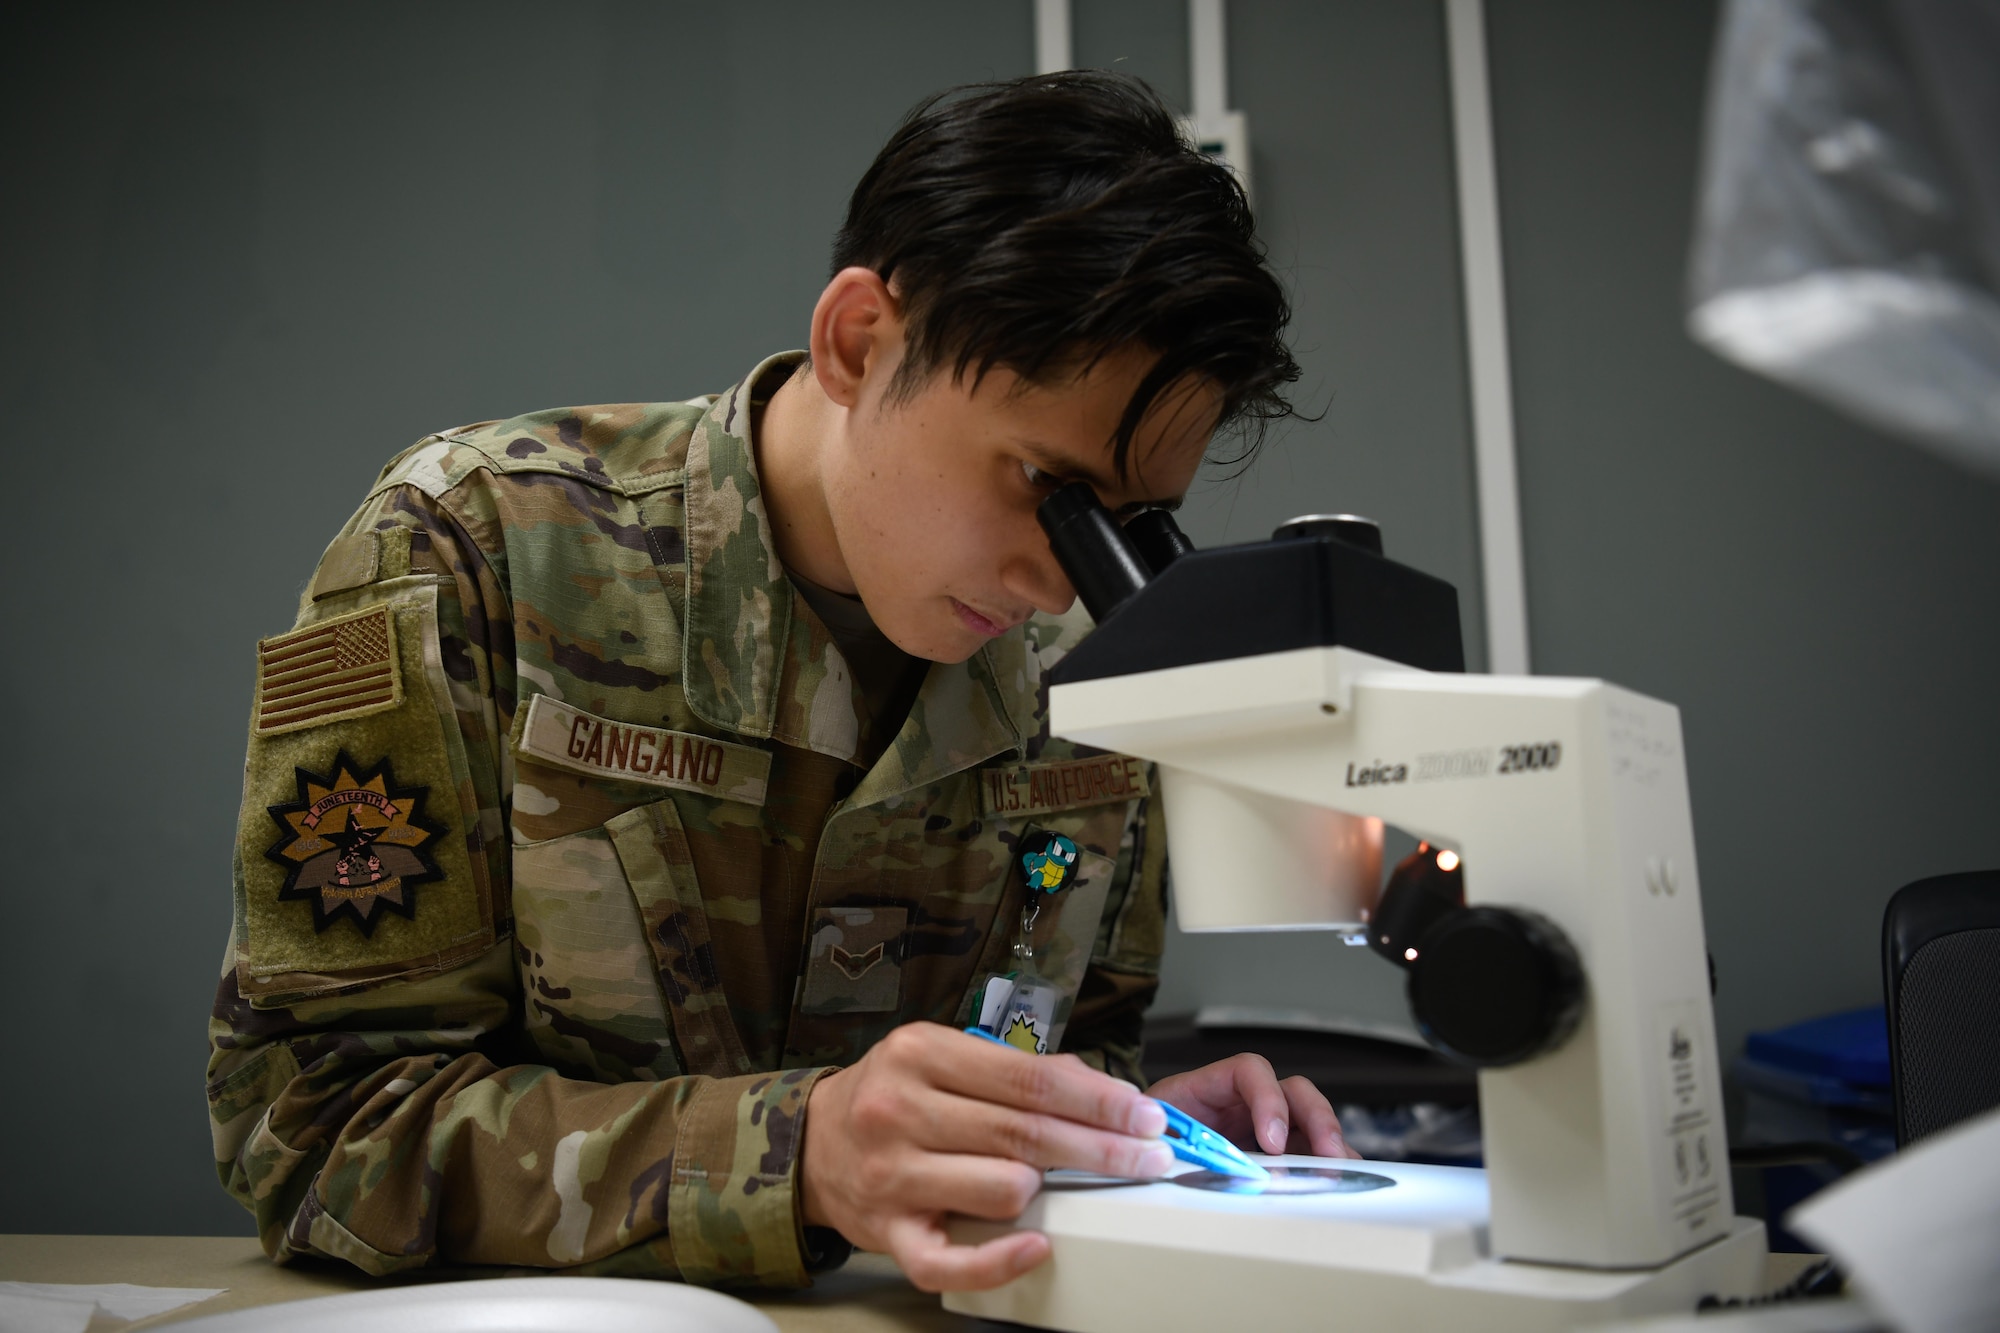 A service member looks under a microscope.